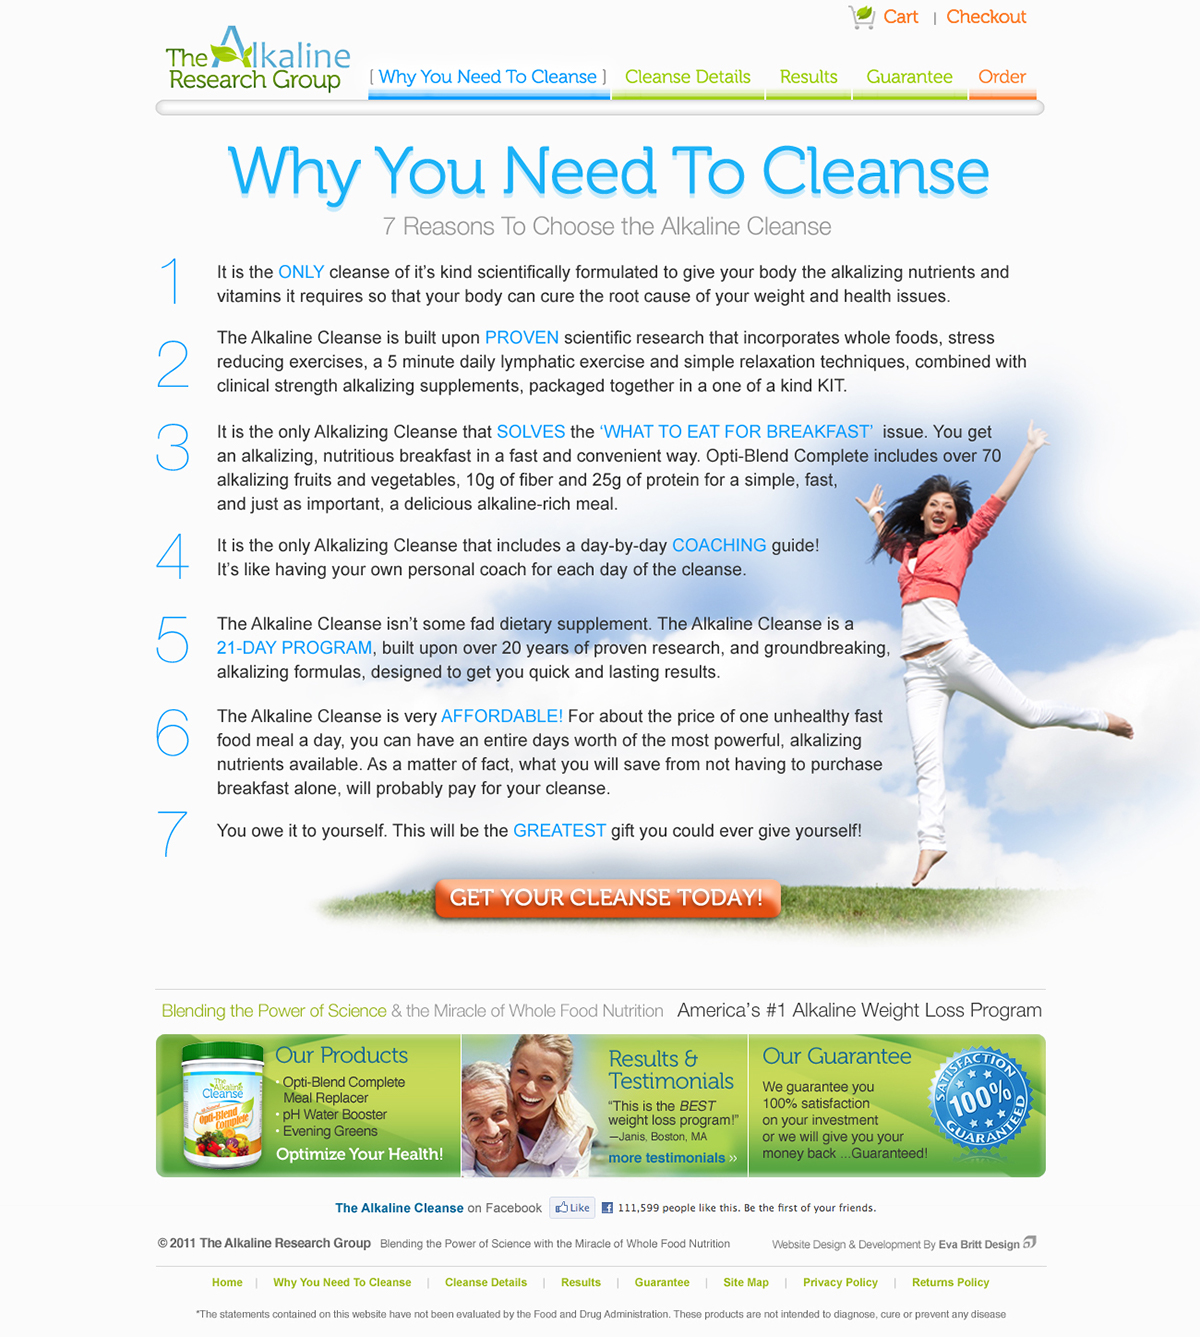 ecommerce website The Alkaline Cleanse Health & Beauty